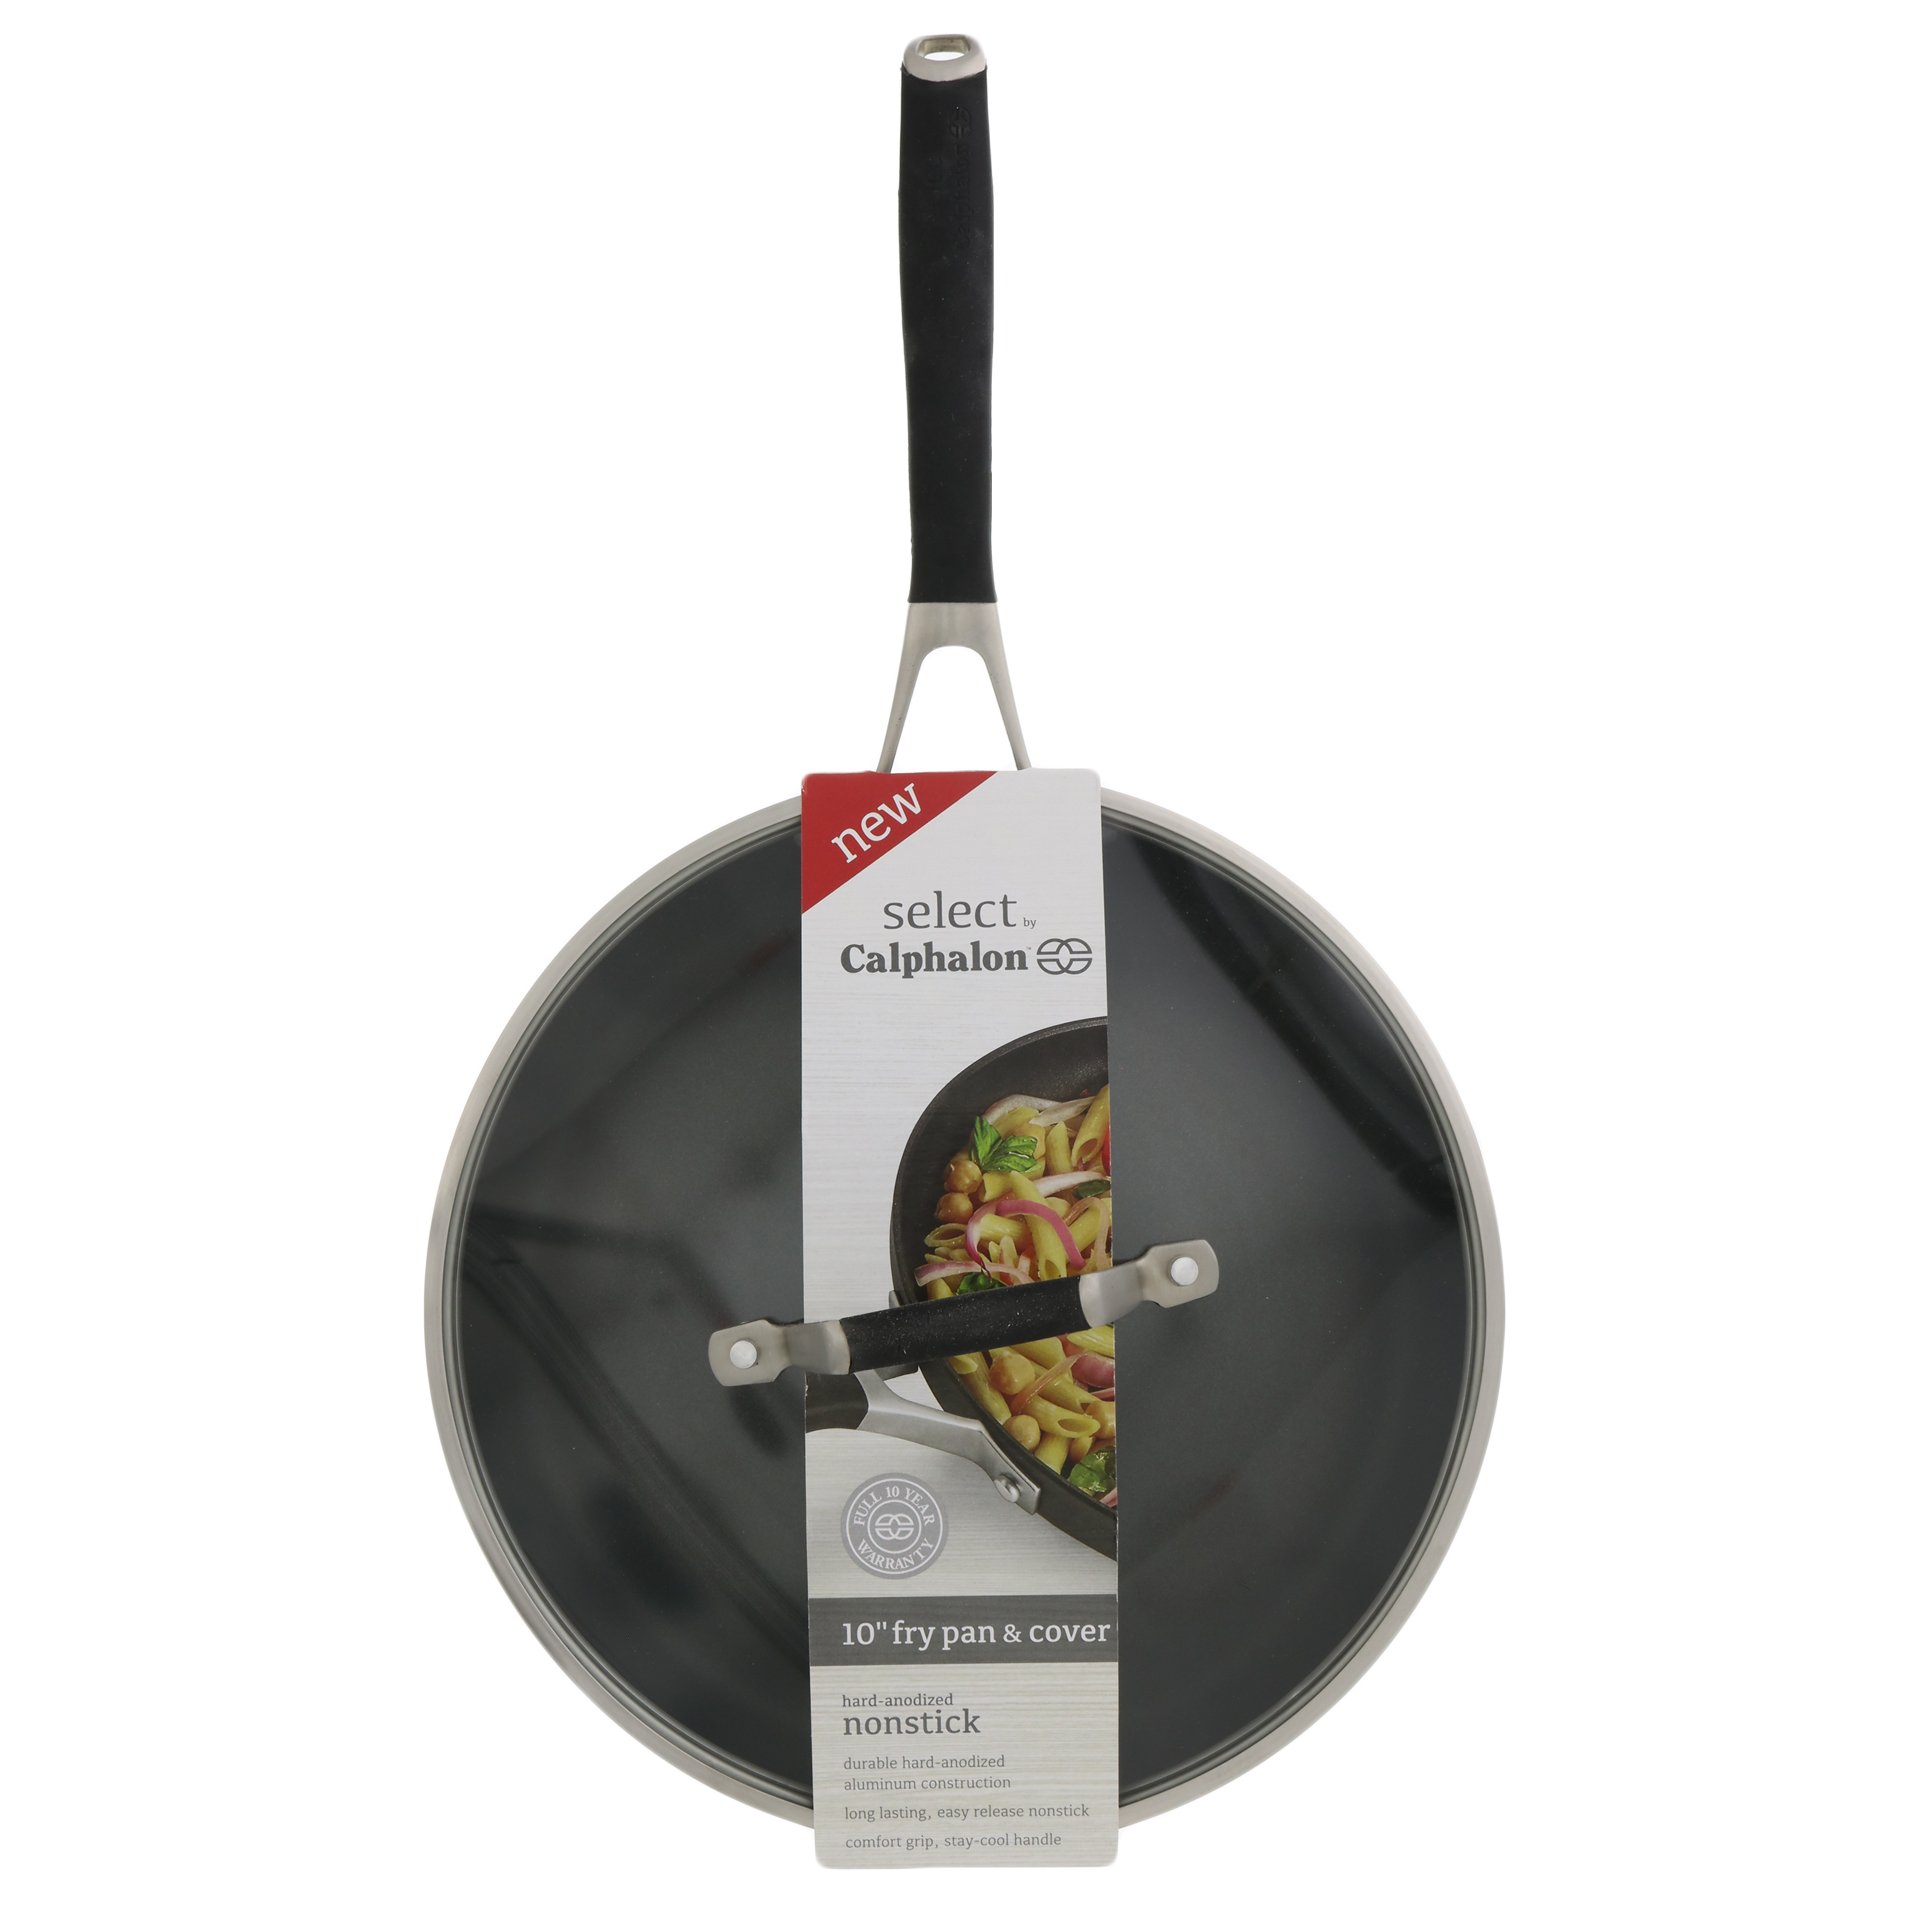 Calphalon Hard Anodized Nonstick Fry Pan with Cover